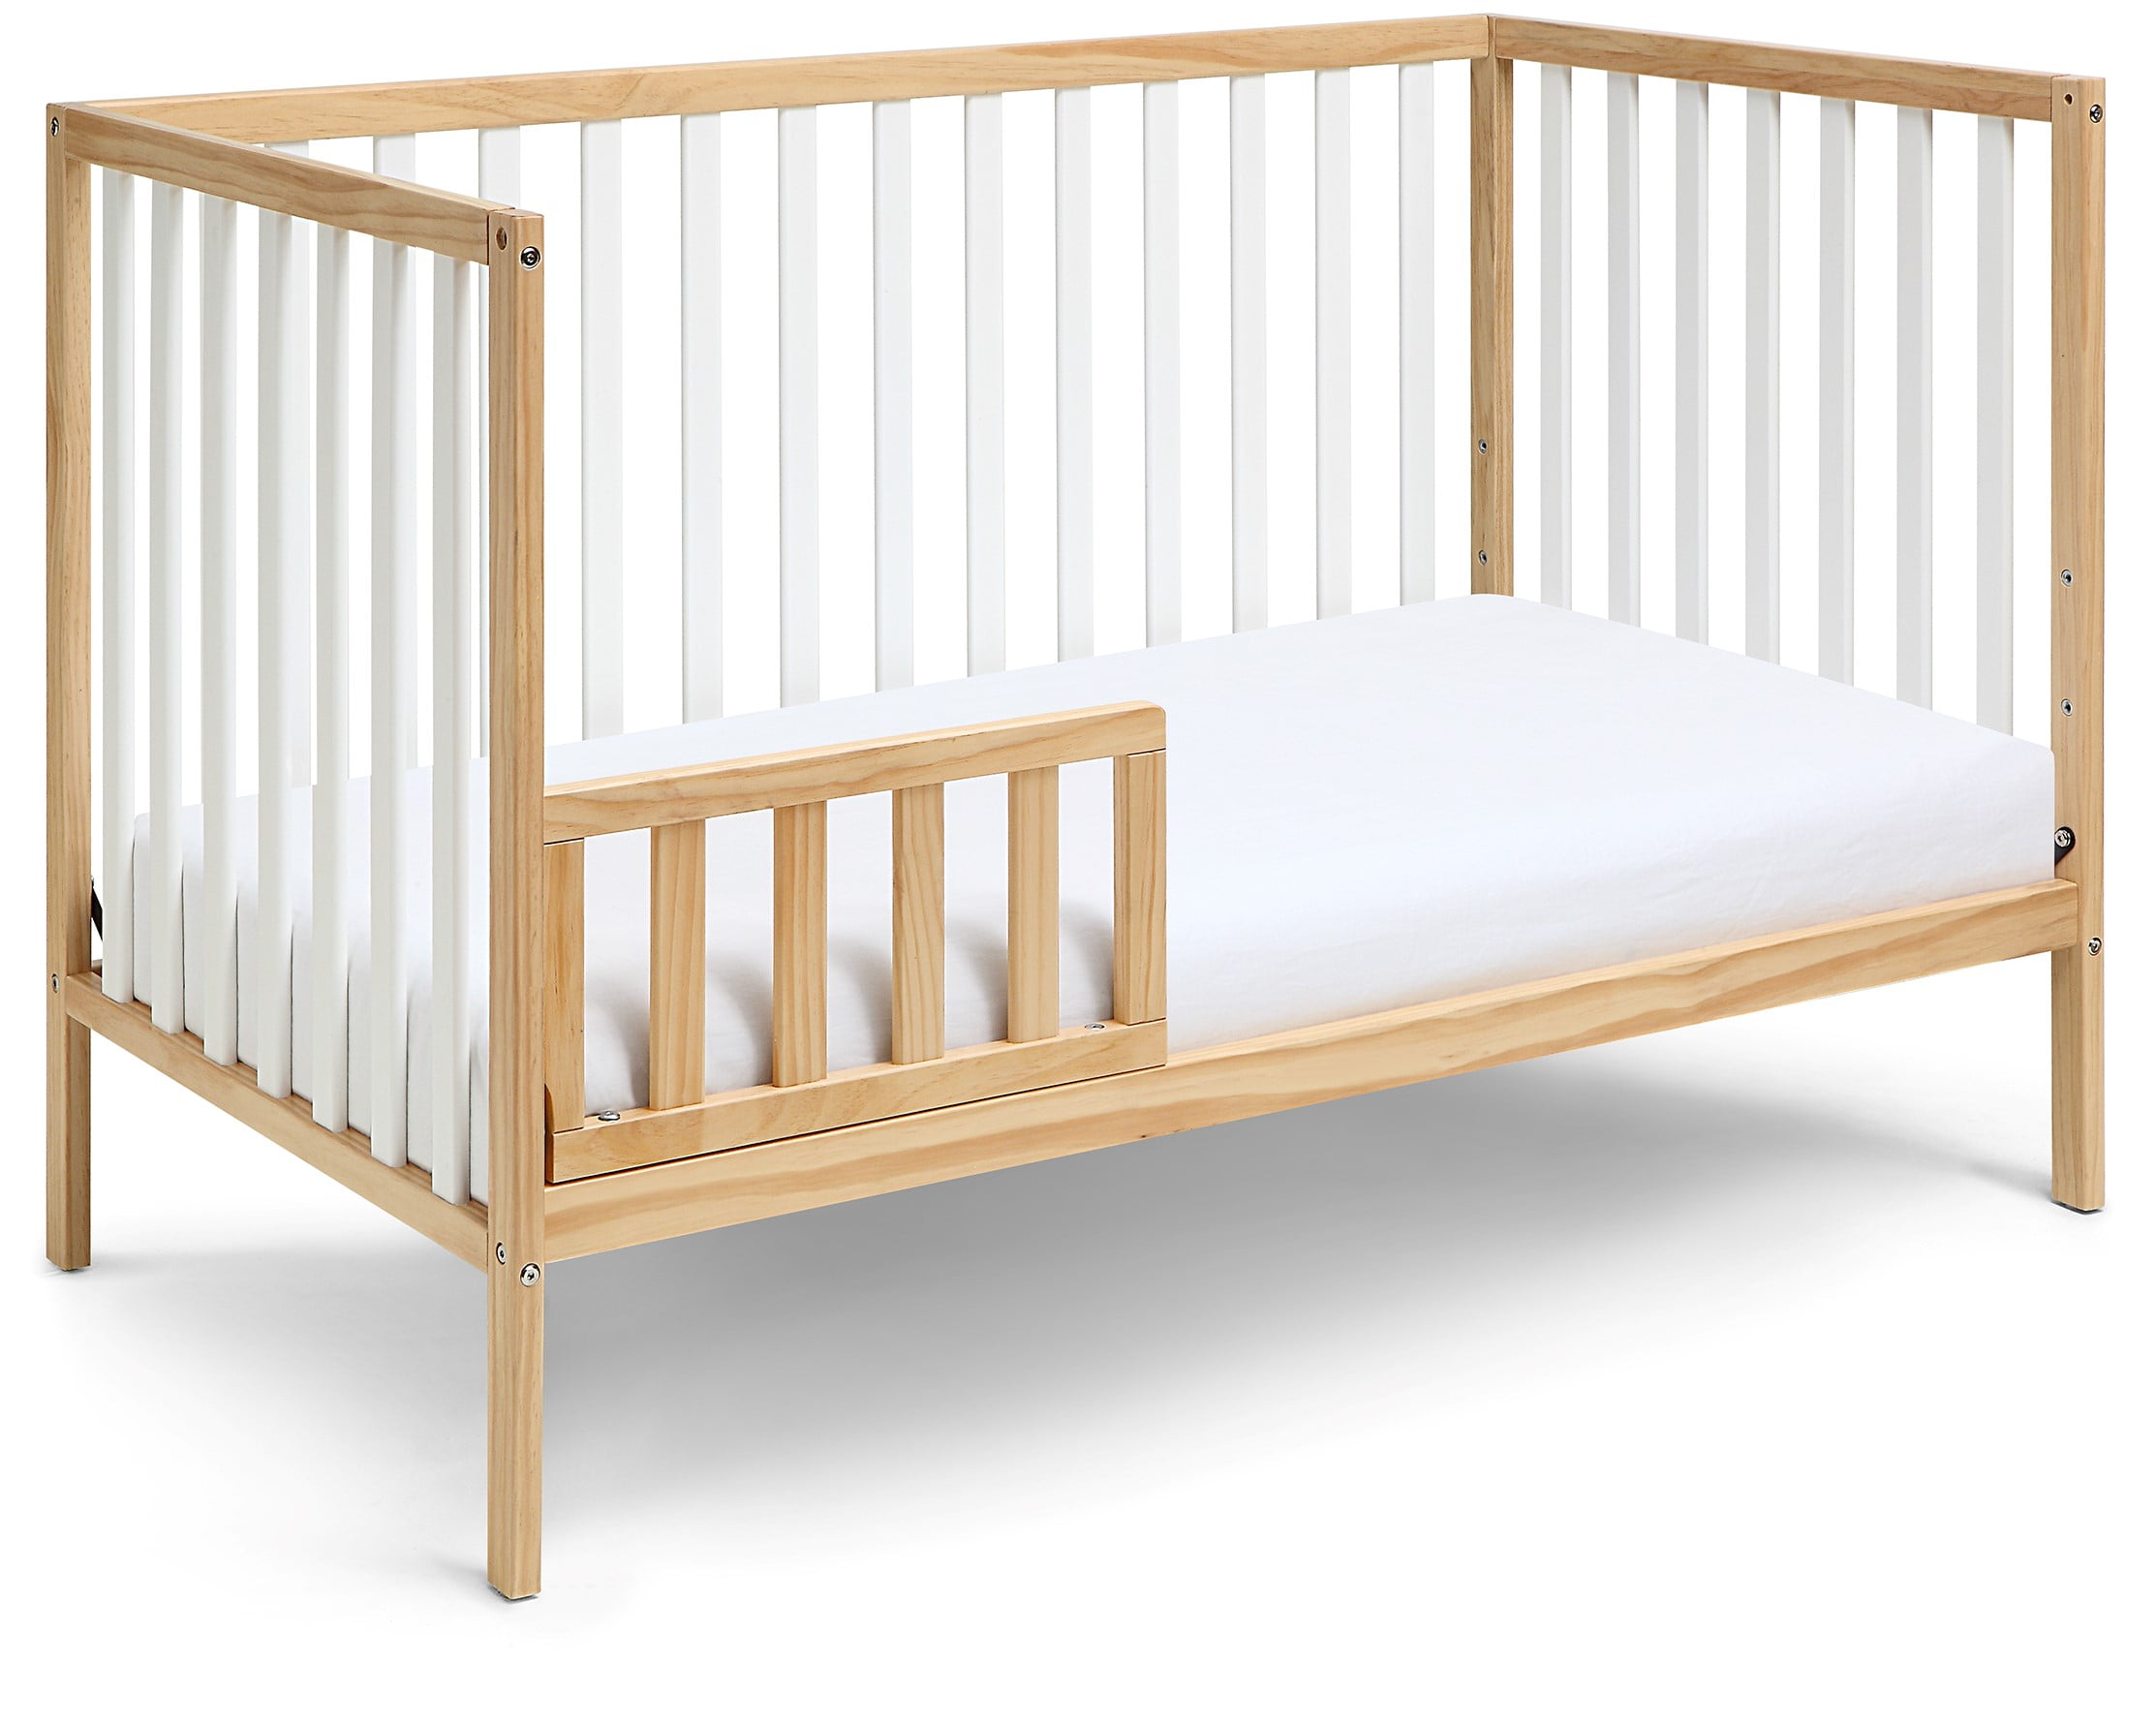 Do Re Me Suite Bebe Deux Remi Island 3-in-1 Convertible Crib in Natural & White 